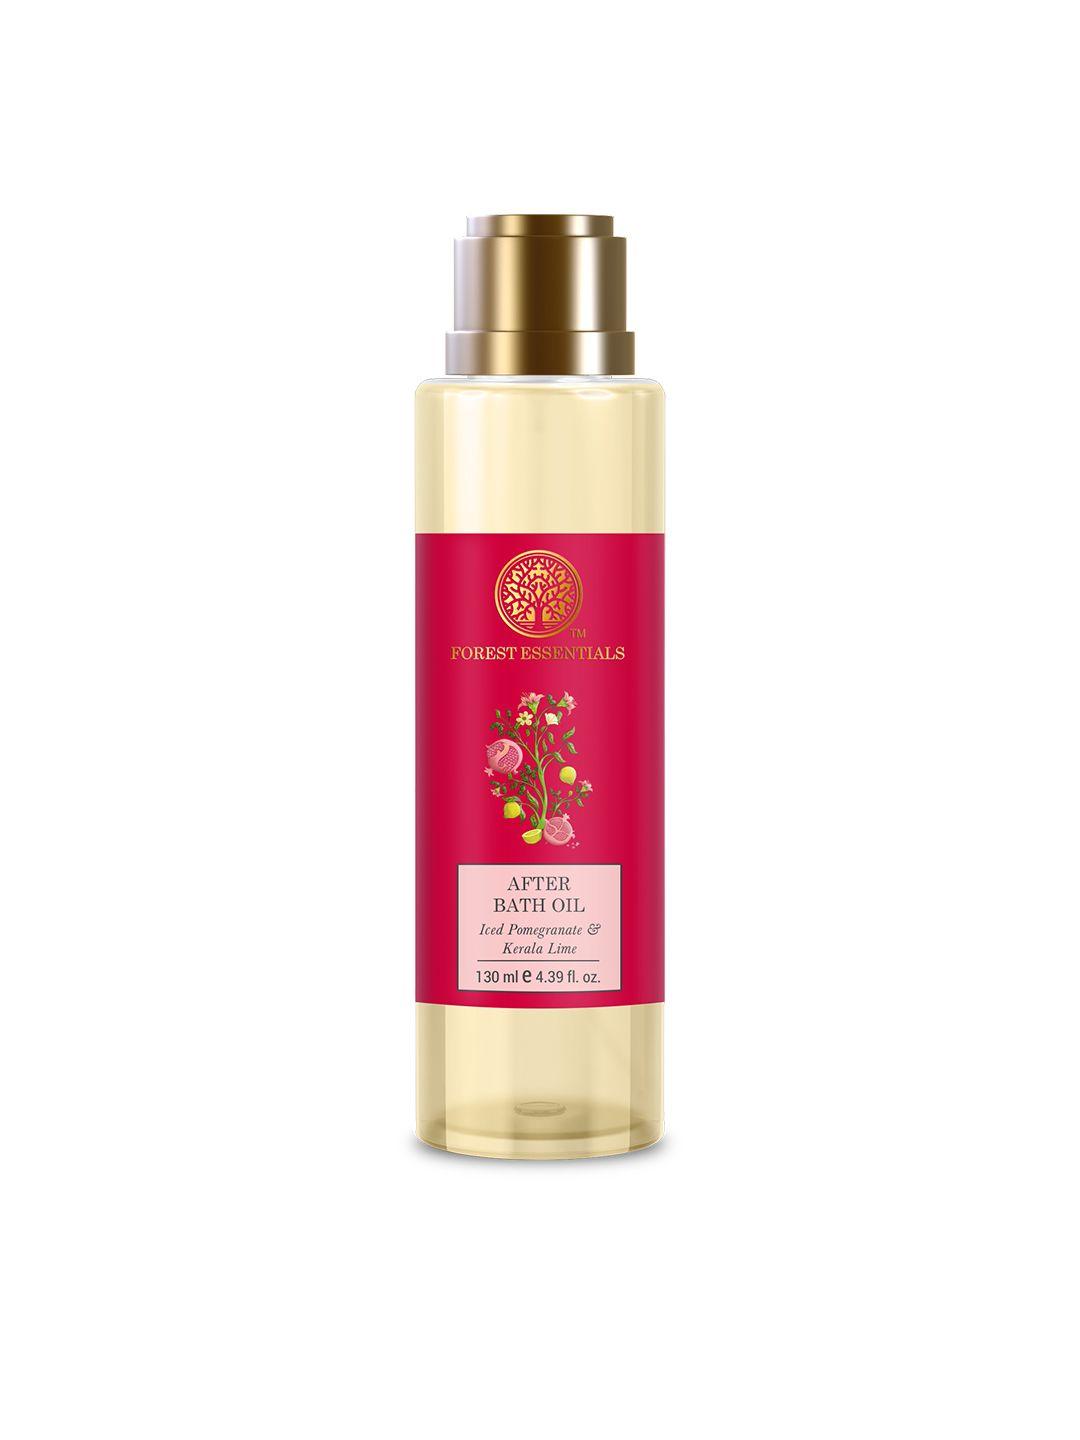 forest essentials ayurvedic after bath shower oil iced pomegranate & kerala lime - 130ml